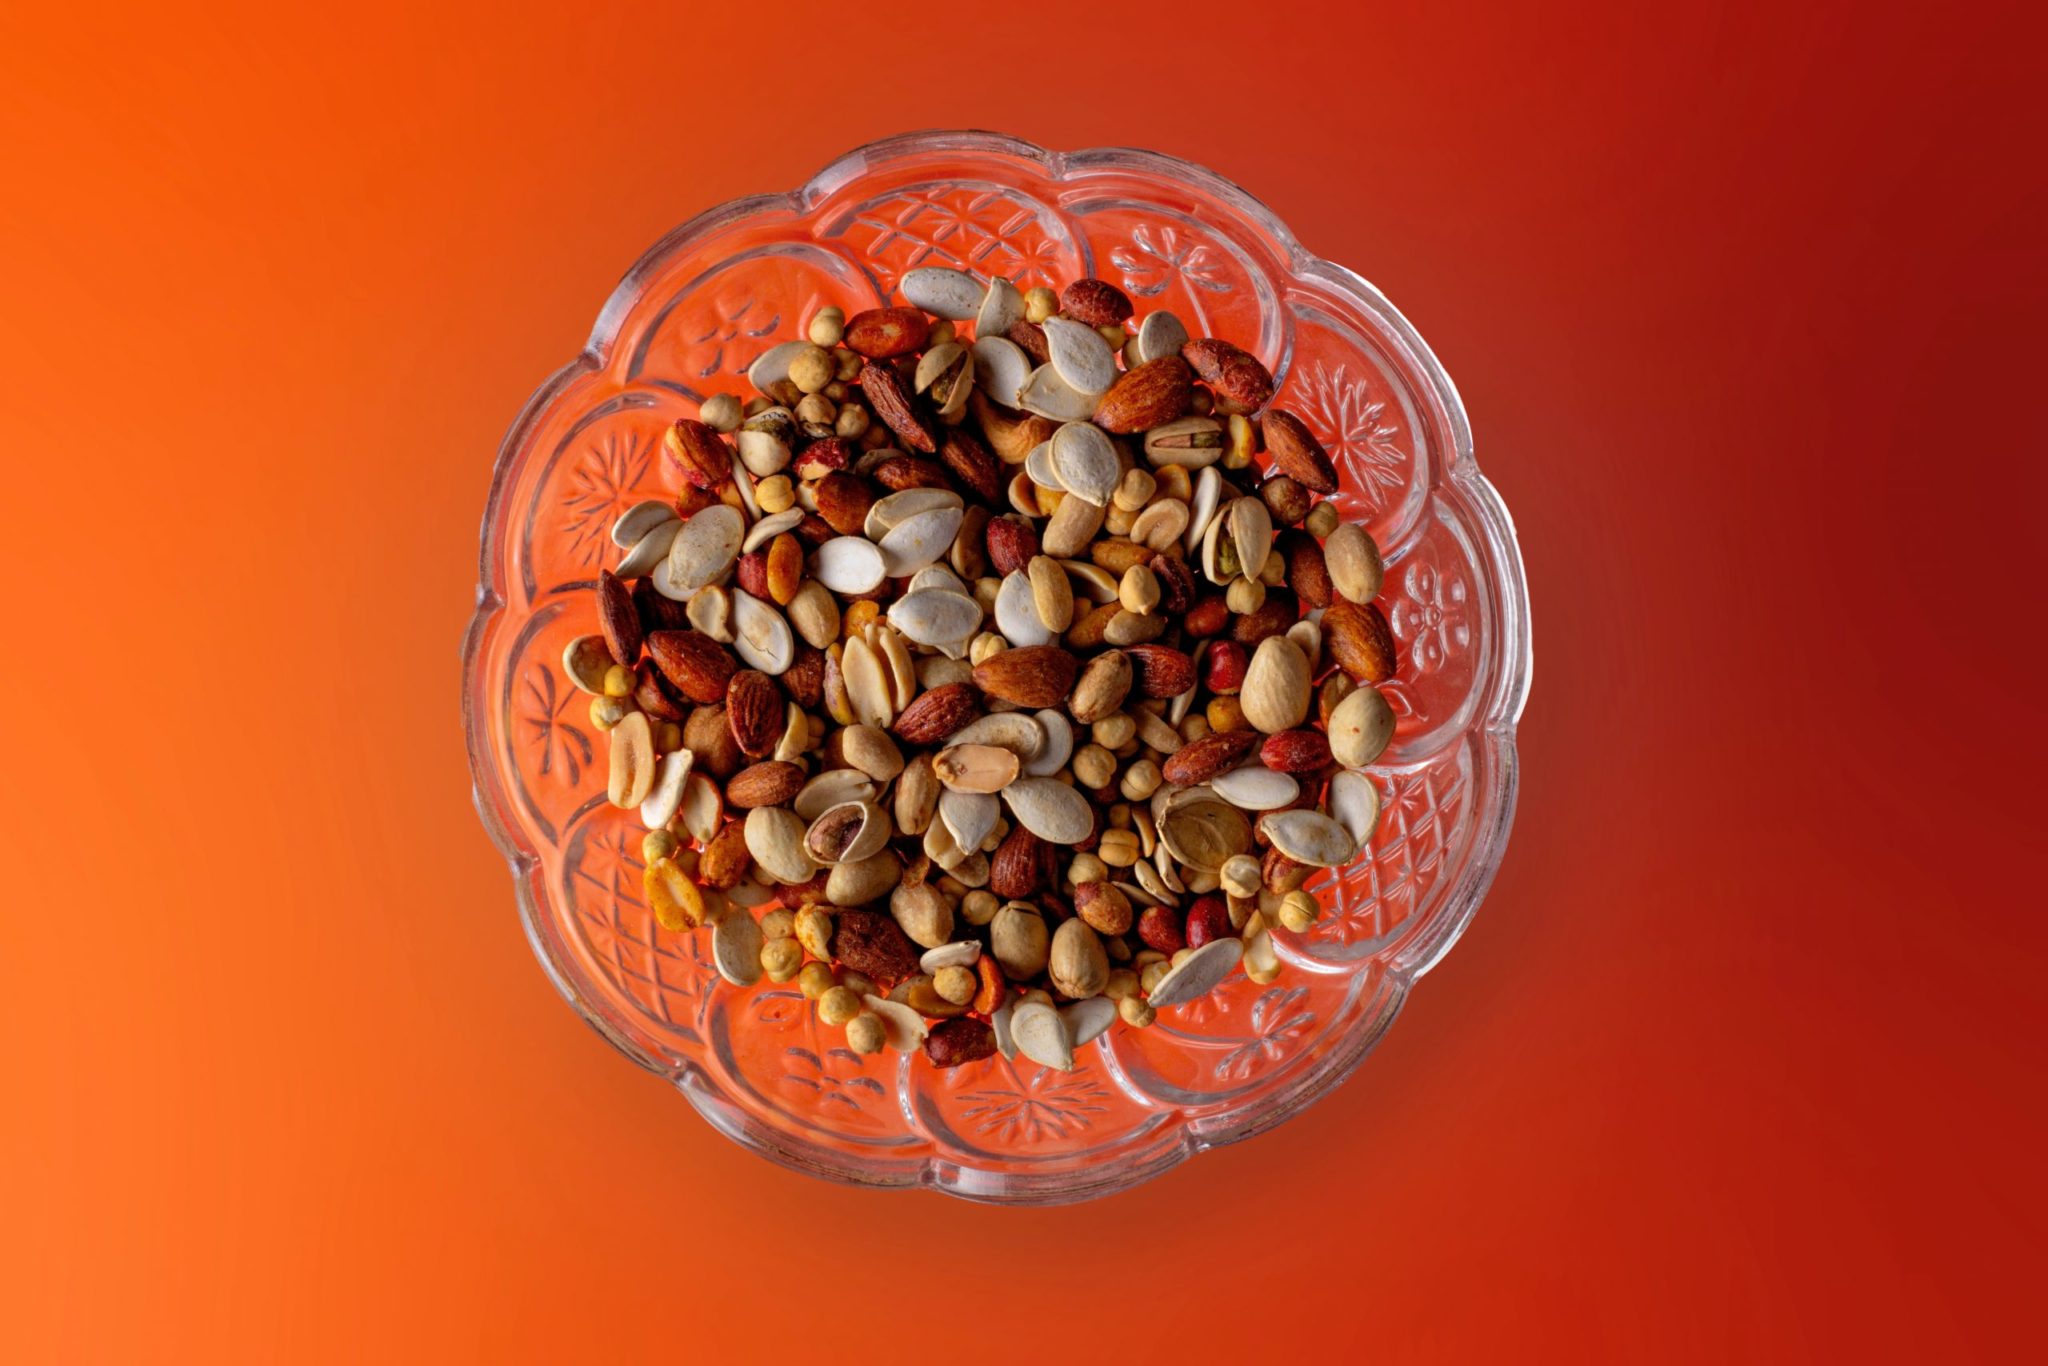 An ornate glass bowl filled with a variety of nuts on an orange table.